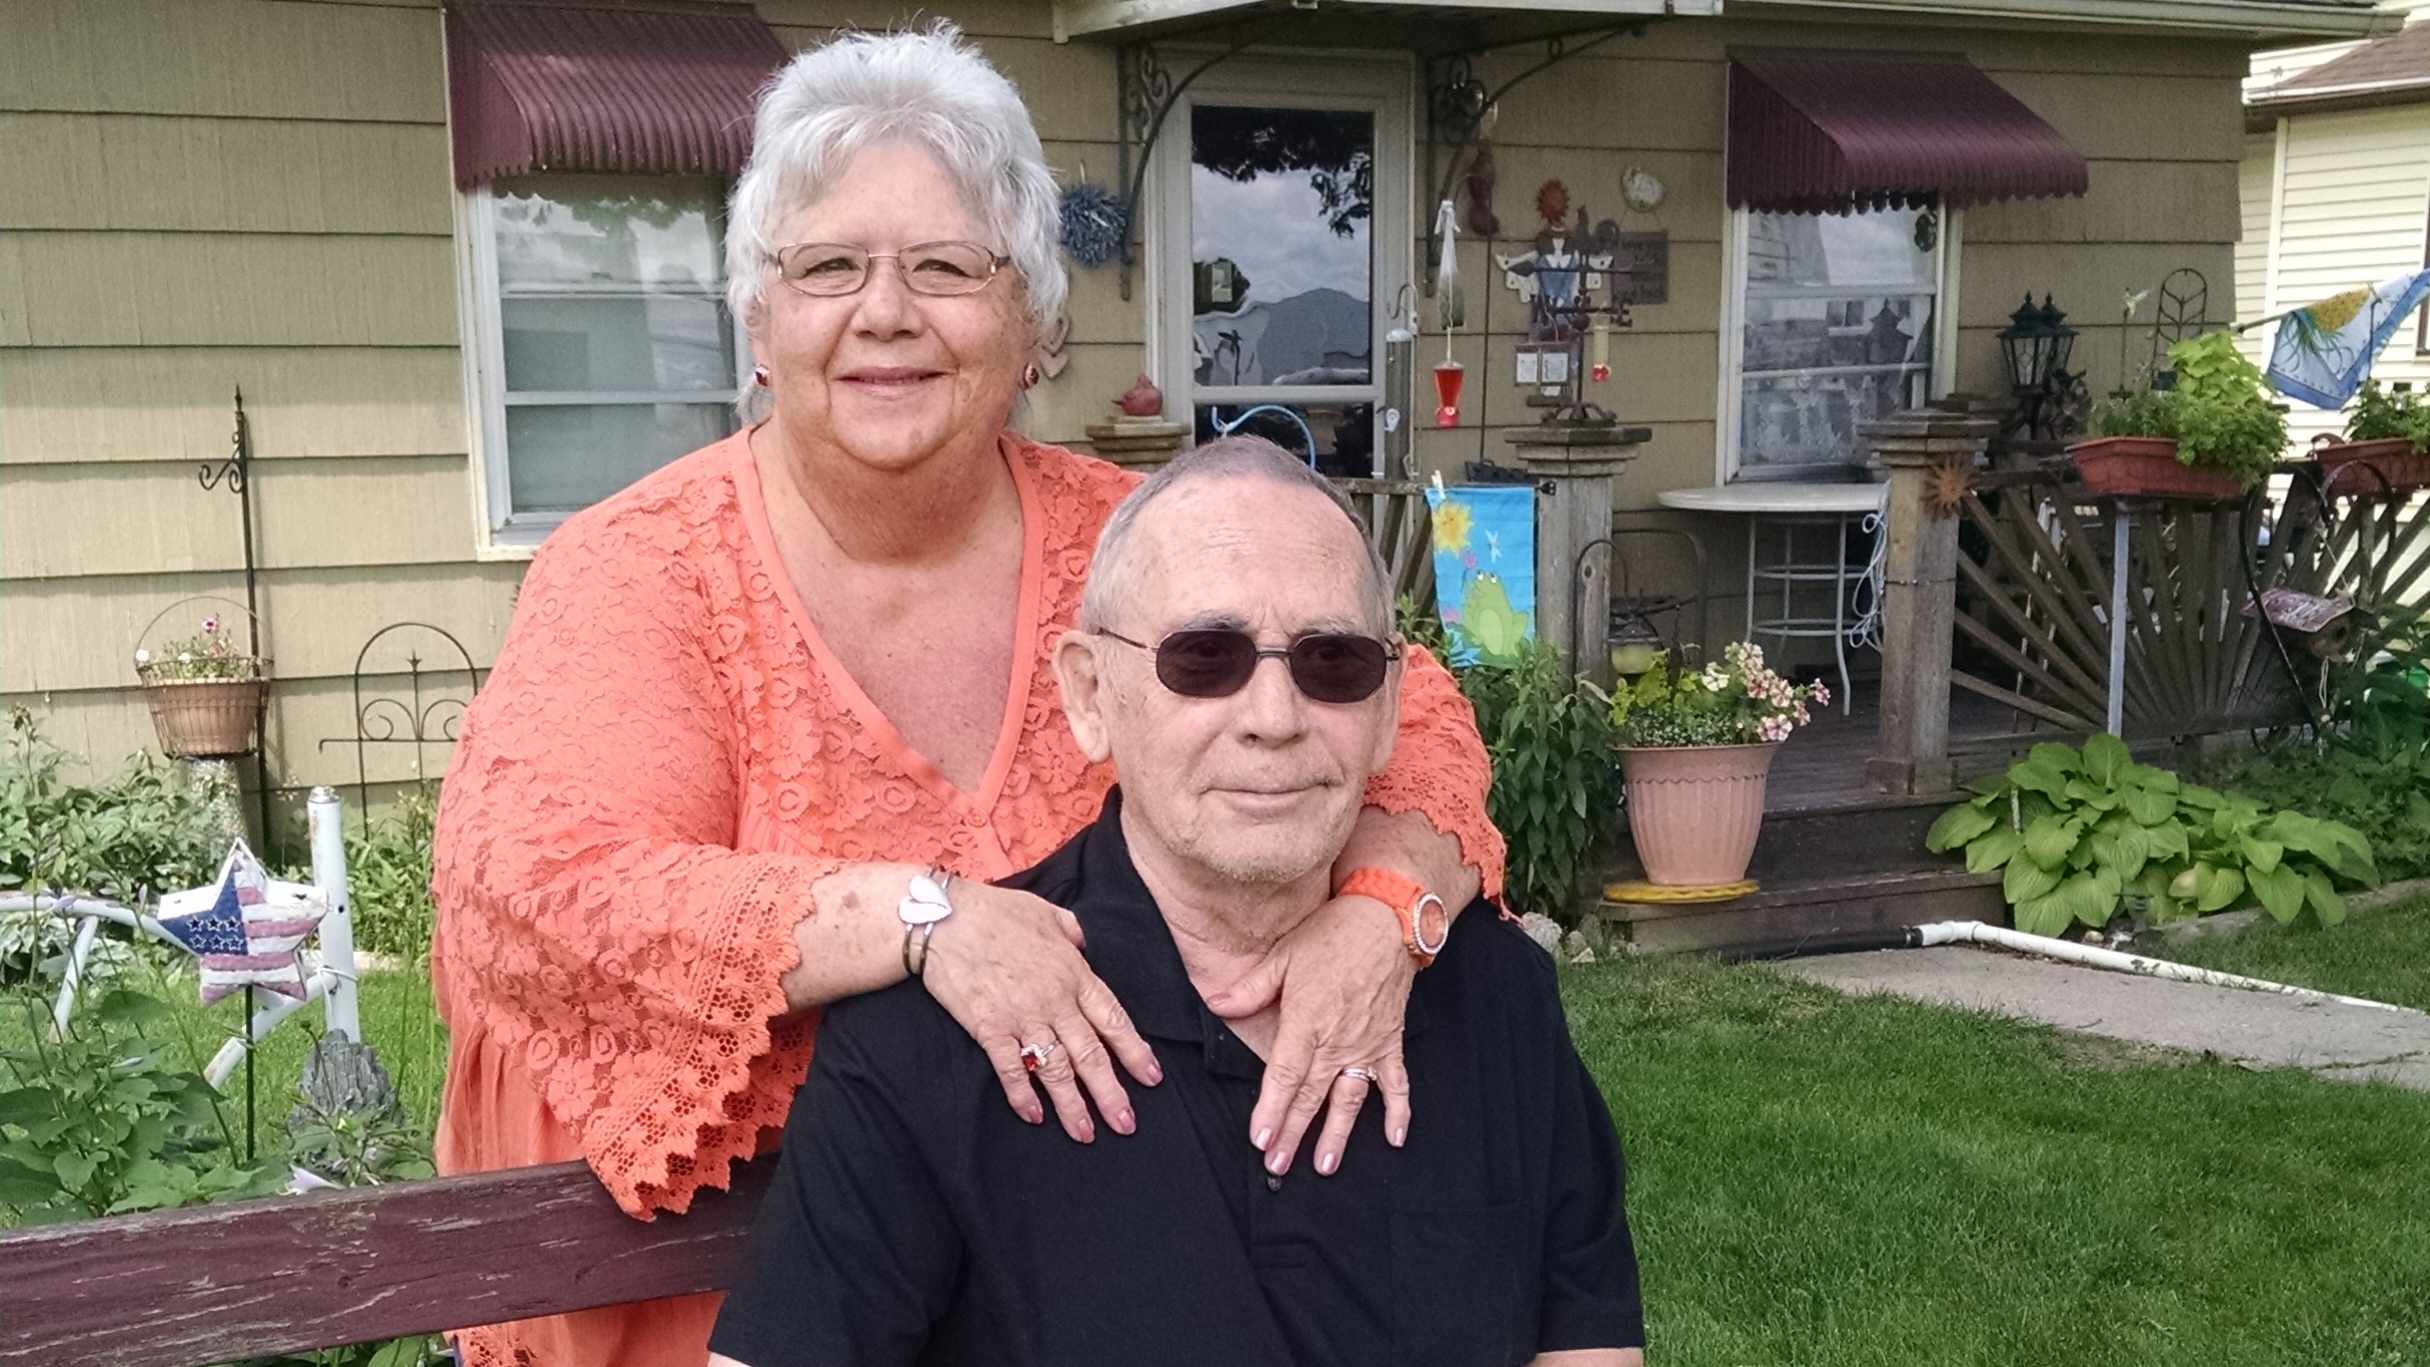 aortic aneurysm patient pictured with his wife outside their home 16x9